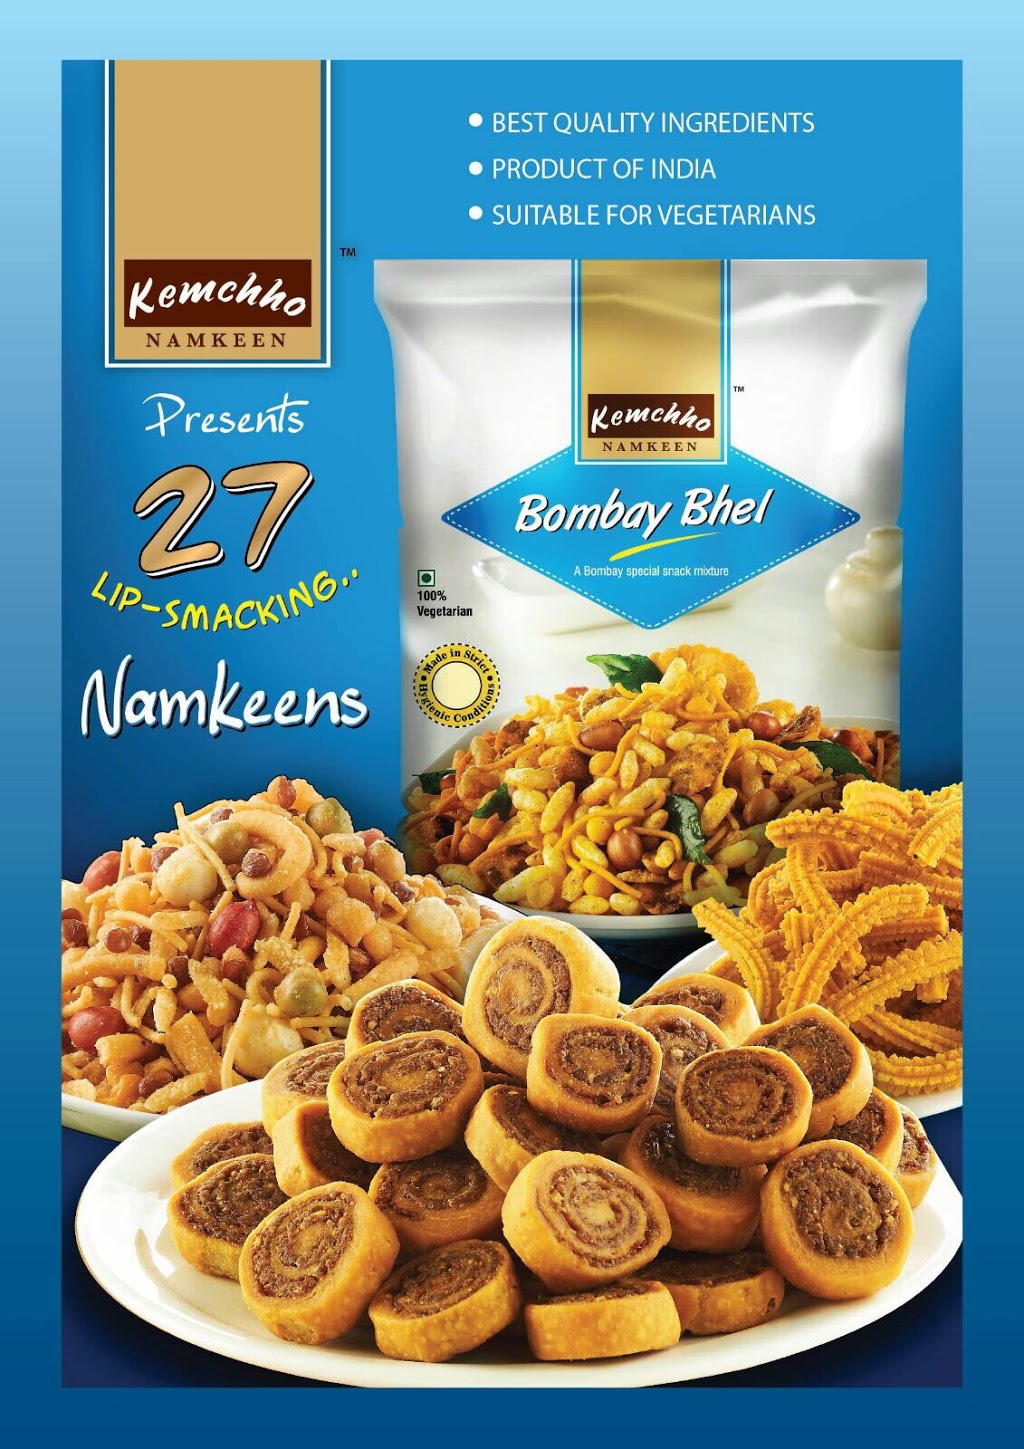 Quality Indian Groceries | supermarket | 1337 Albany Hwy, Cannington WA 6107, Australia | 0894511119 OR +61 8 9451 1119